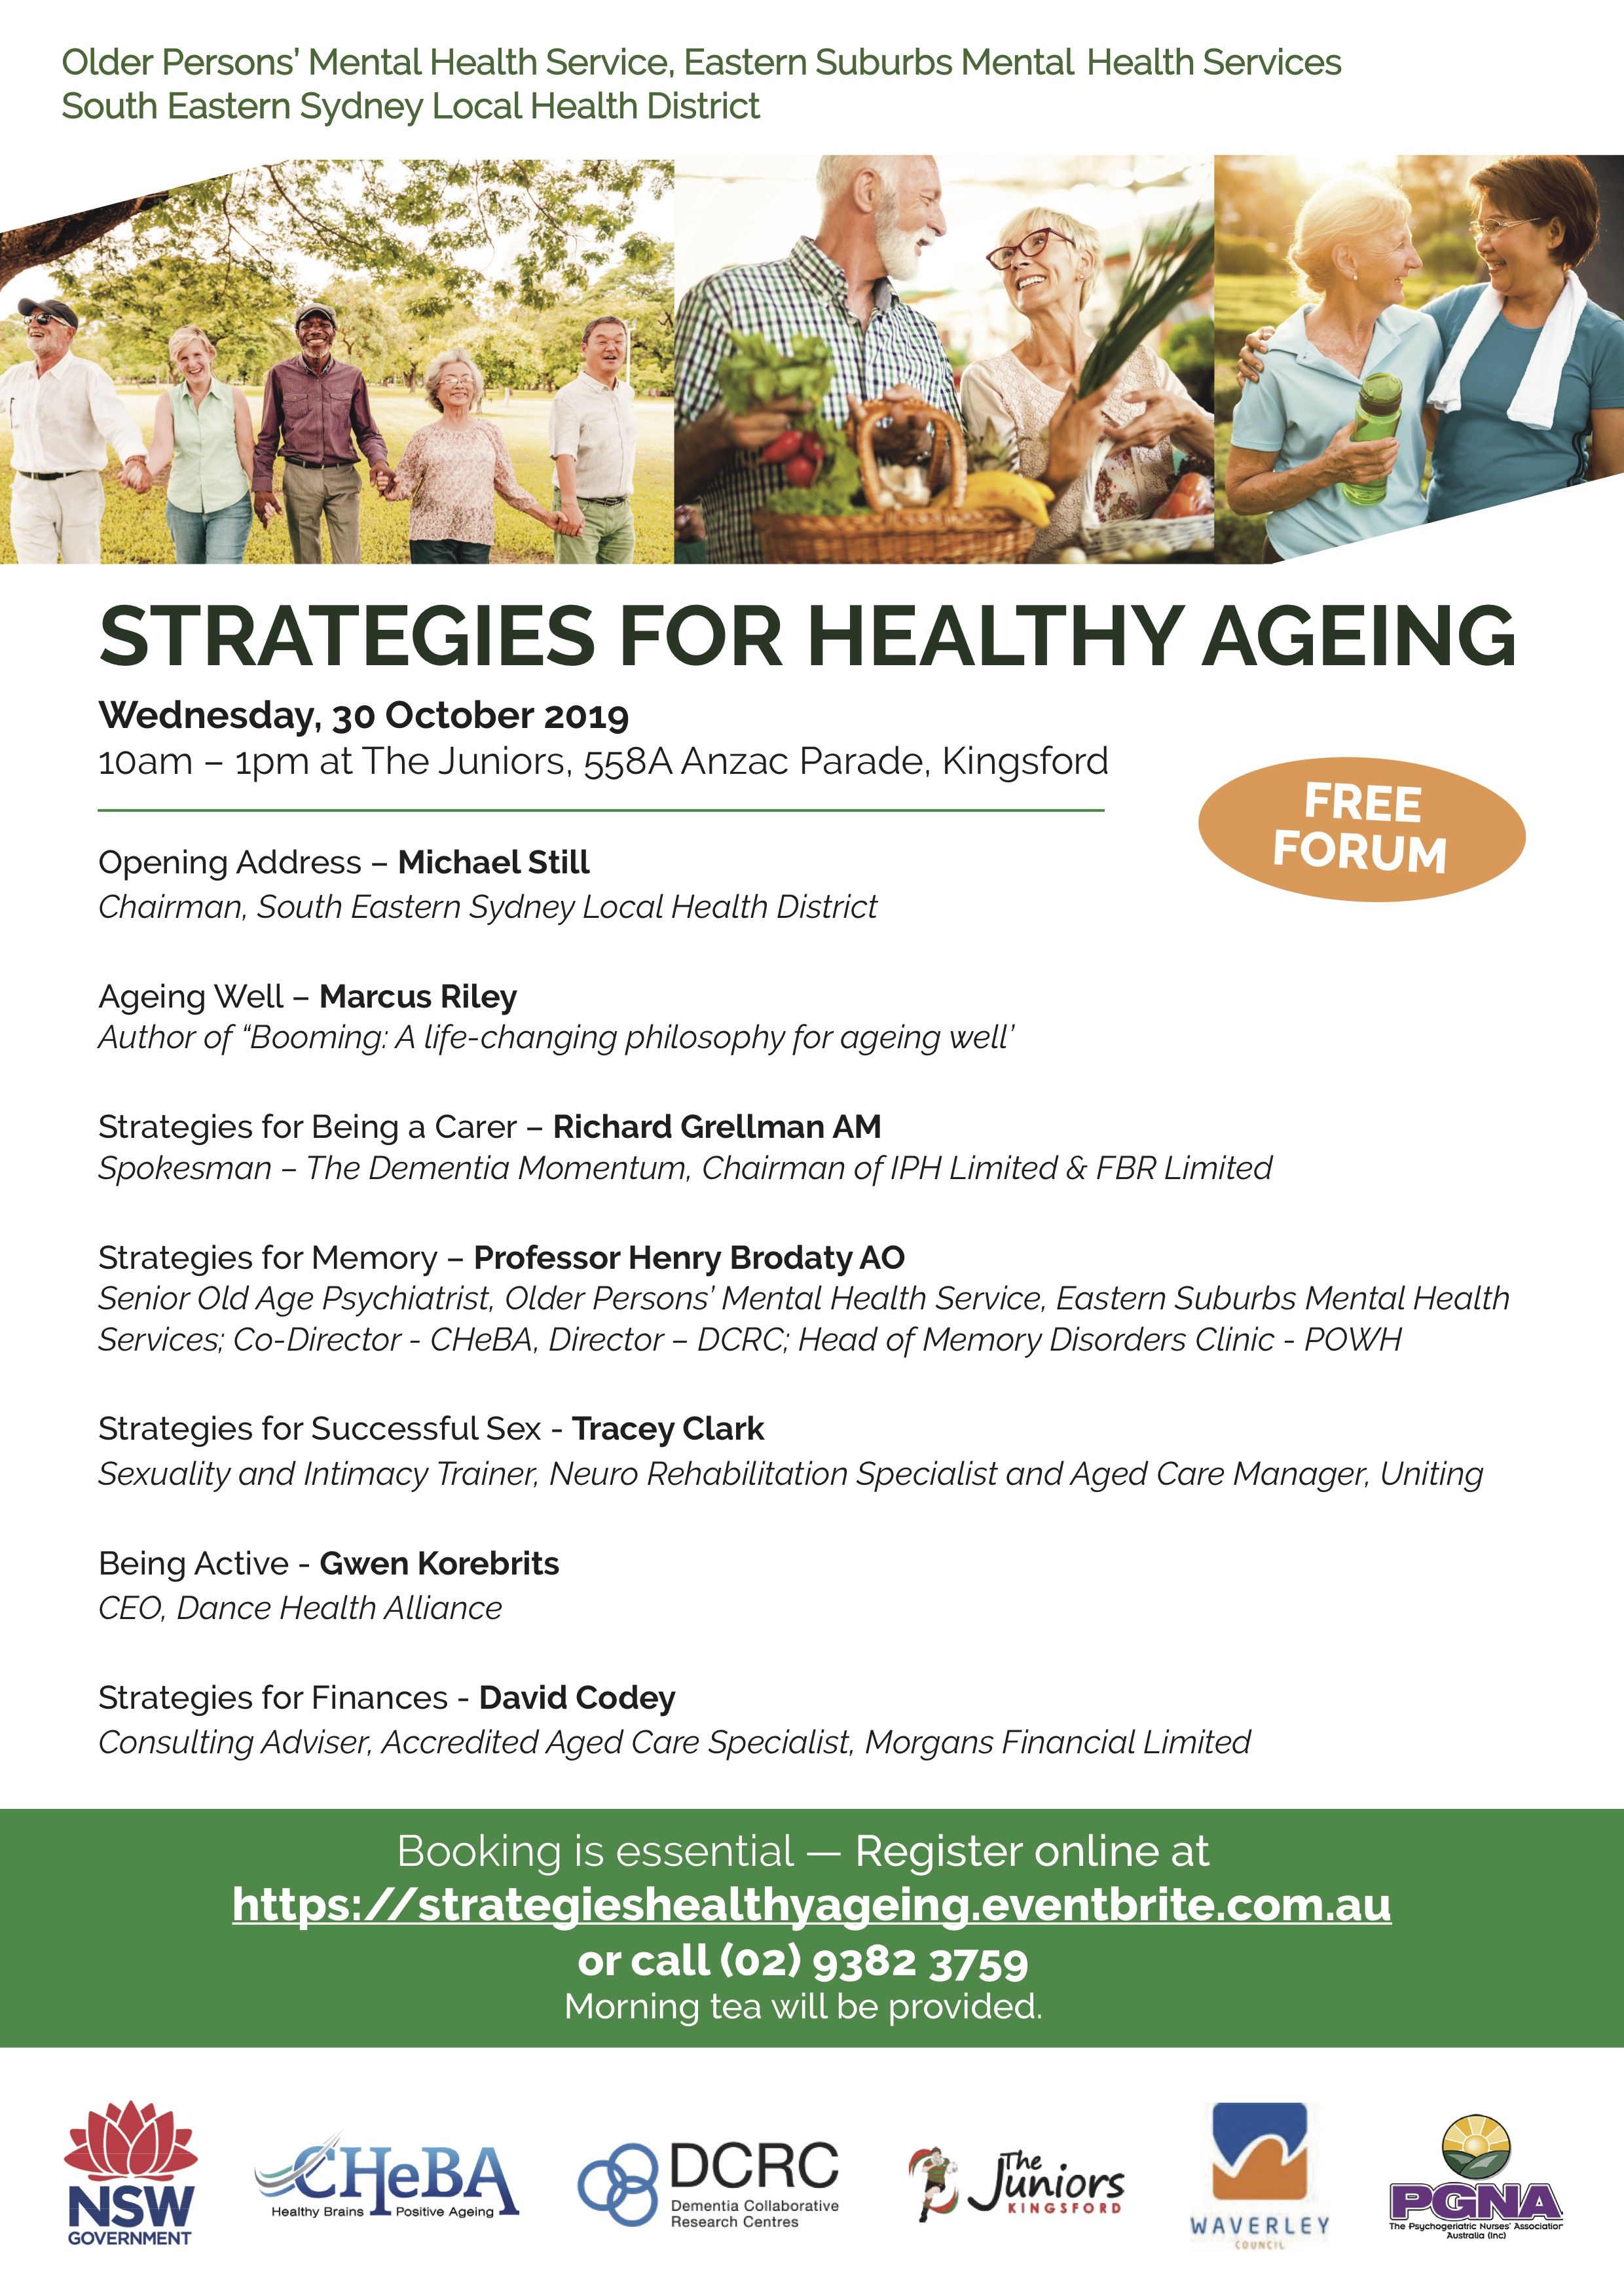 STRATEGIES FOR HEALTHY AGEING (2019)